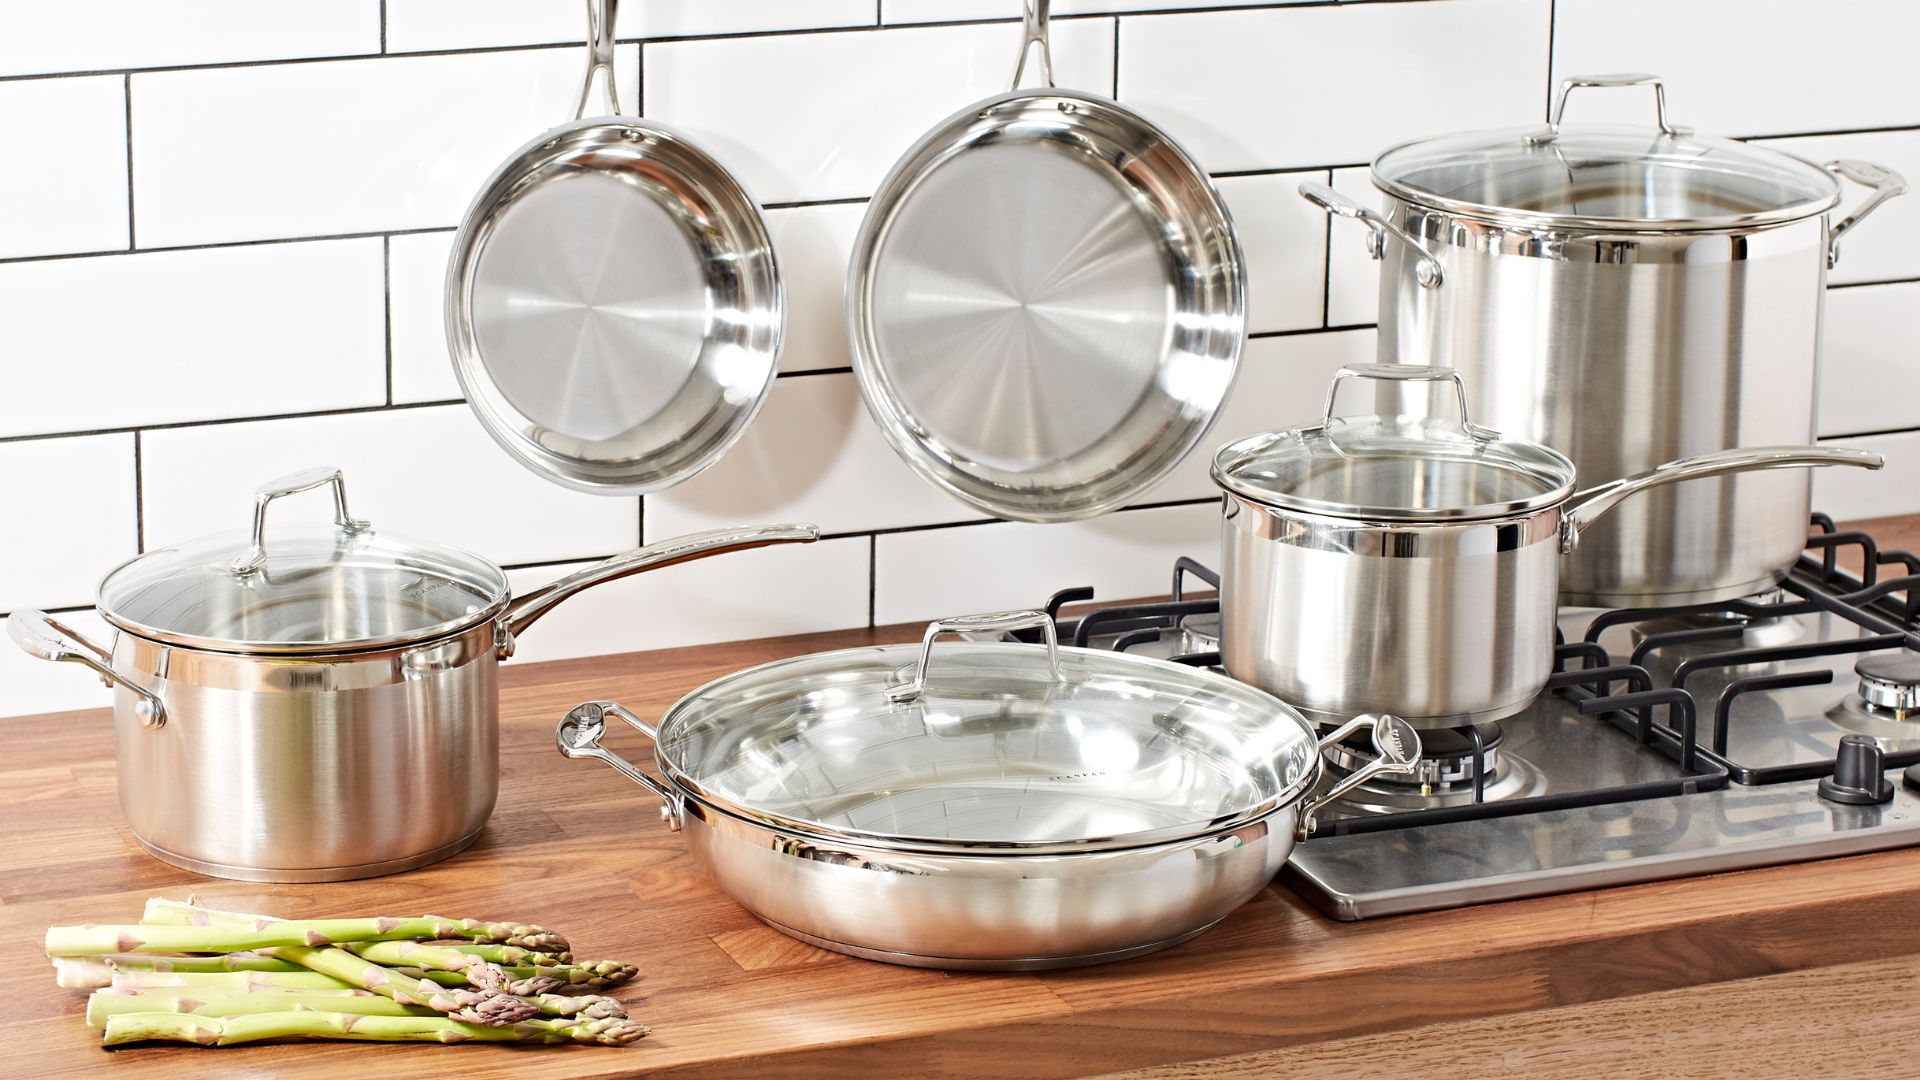 Ensure that you clean your cookware properly after each use